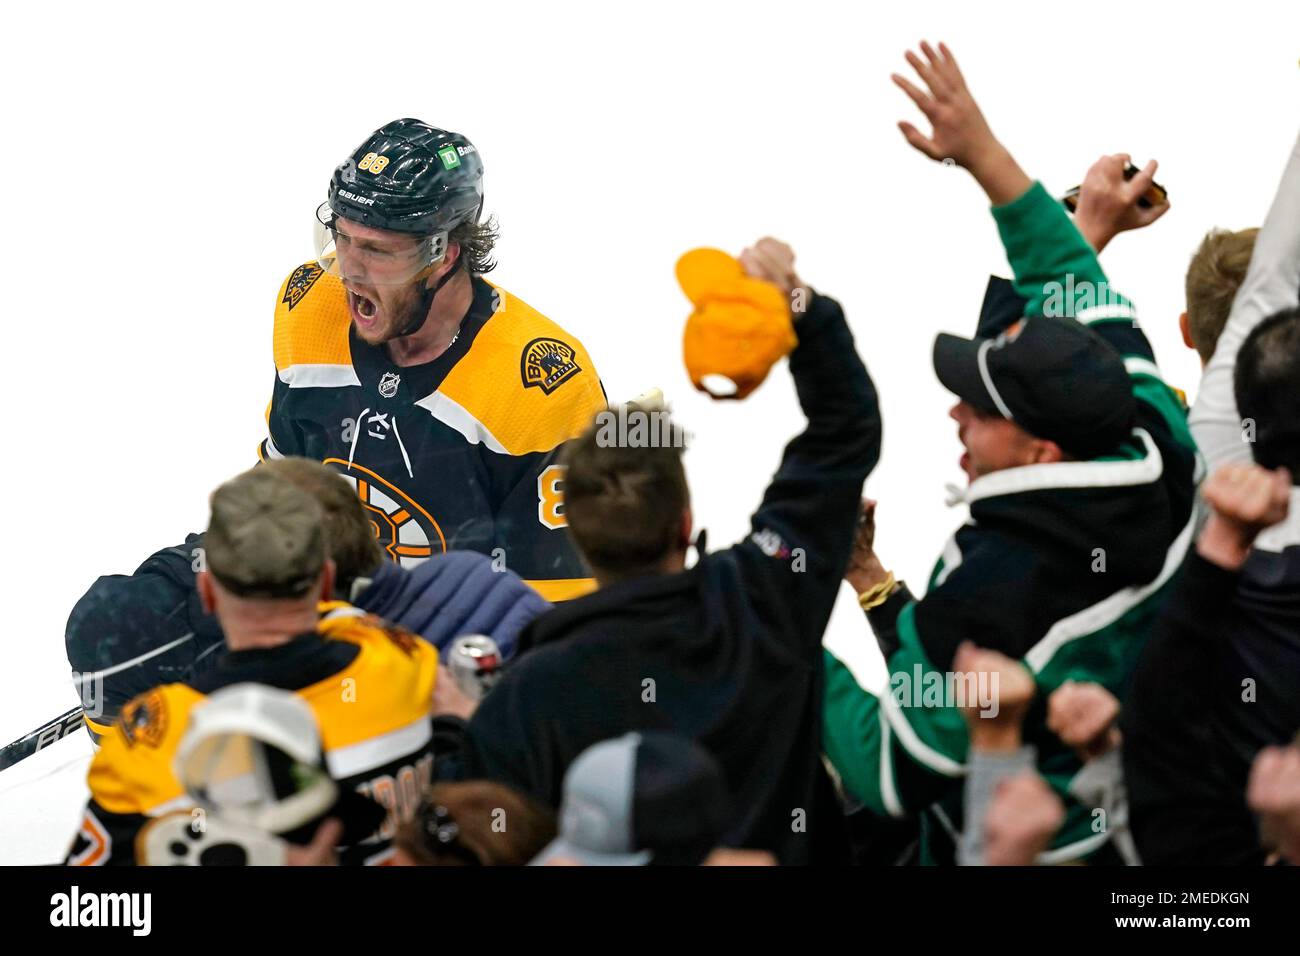 Boston Bruins right wing David Pastrnak (88) celebrates his goal against the New York Islanders in the third period of Game 1 during an NHL hockey second-round playoff series, Saturday, May 29, 2021, in Boston. It was Pastrnak's third goal of the game. (AP Photo/Elise Amendola) Stock Photo